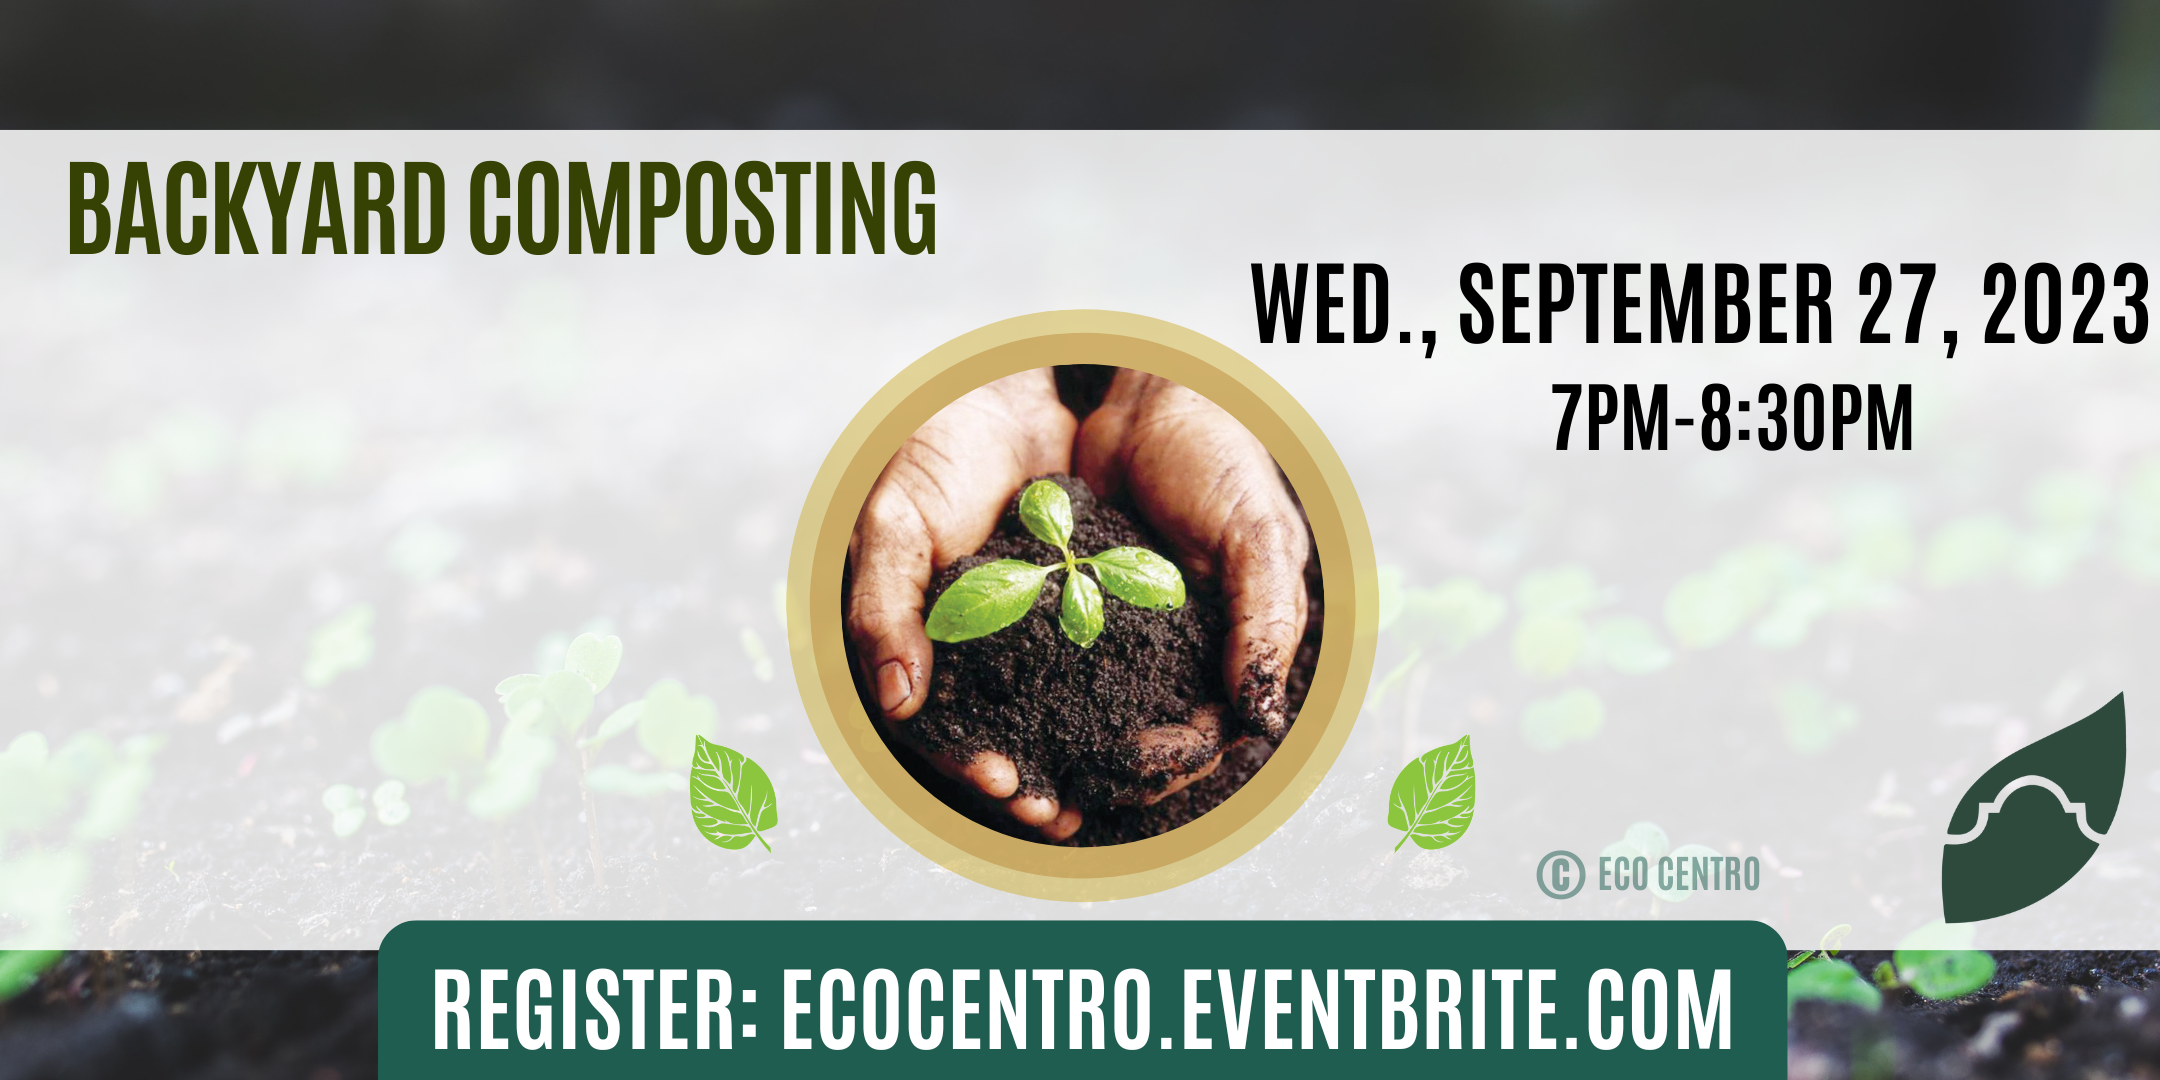 https://www.alamo.edu/siteassets/sac/about-sac/college-offices/eco-centro/fall23-events/backyard-composting.fw.png